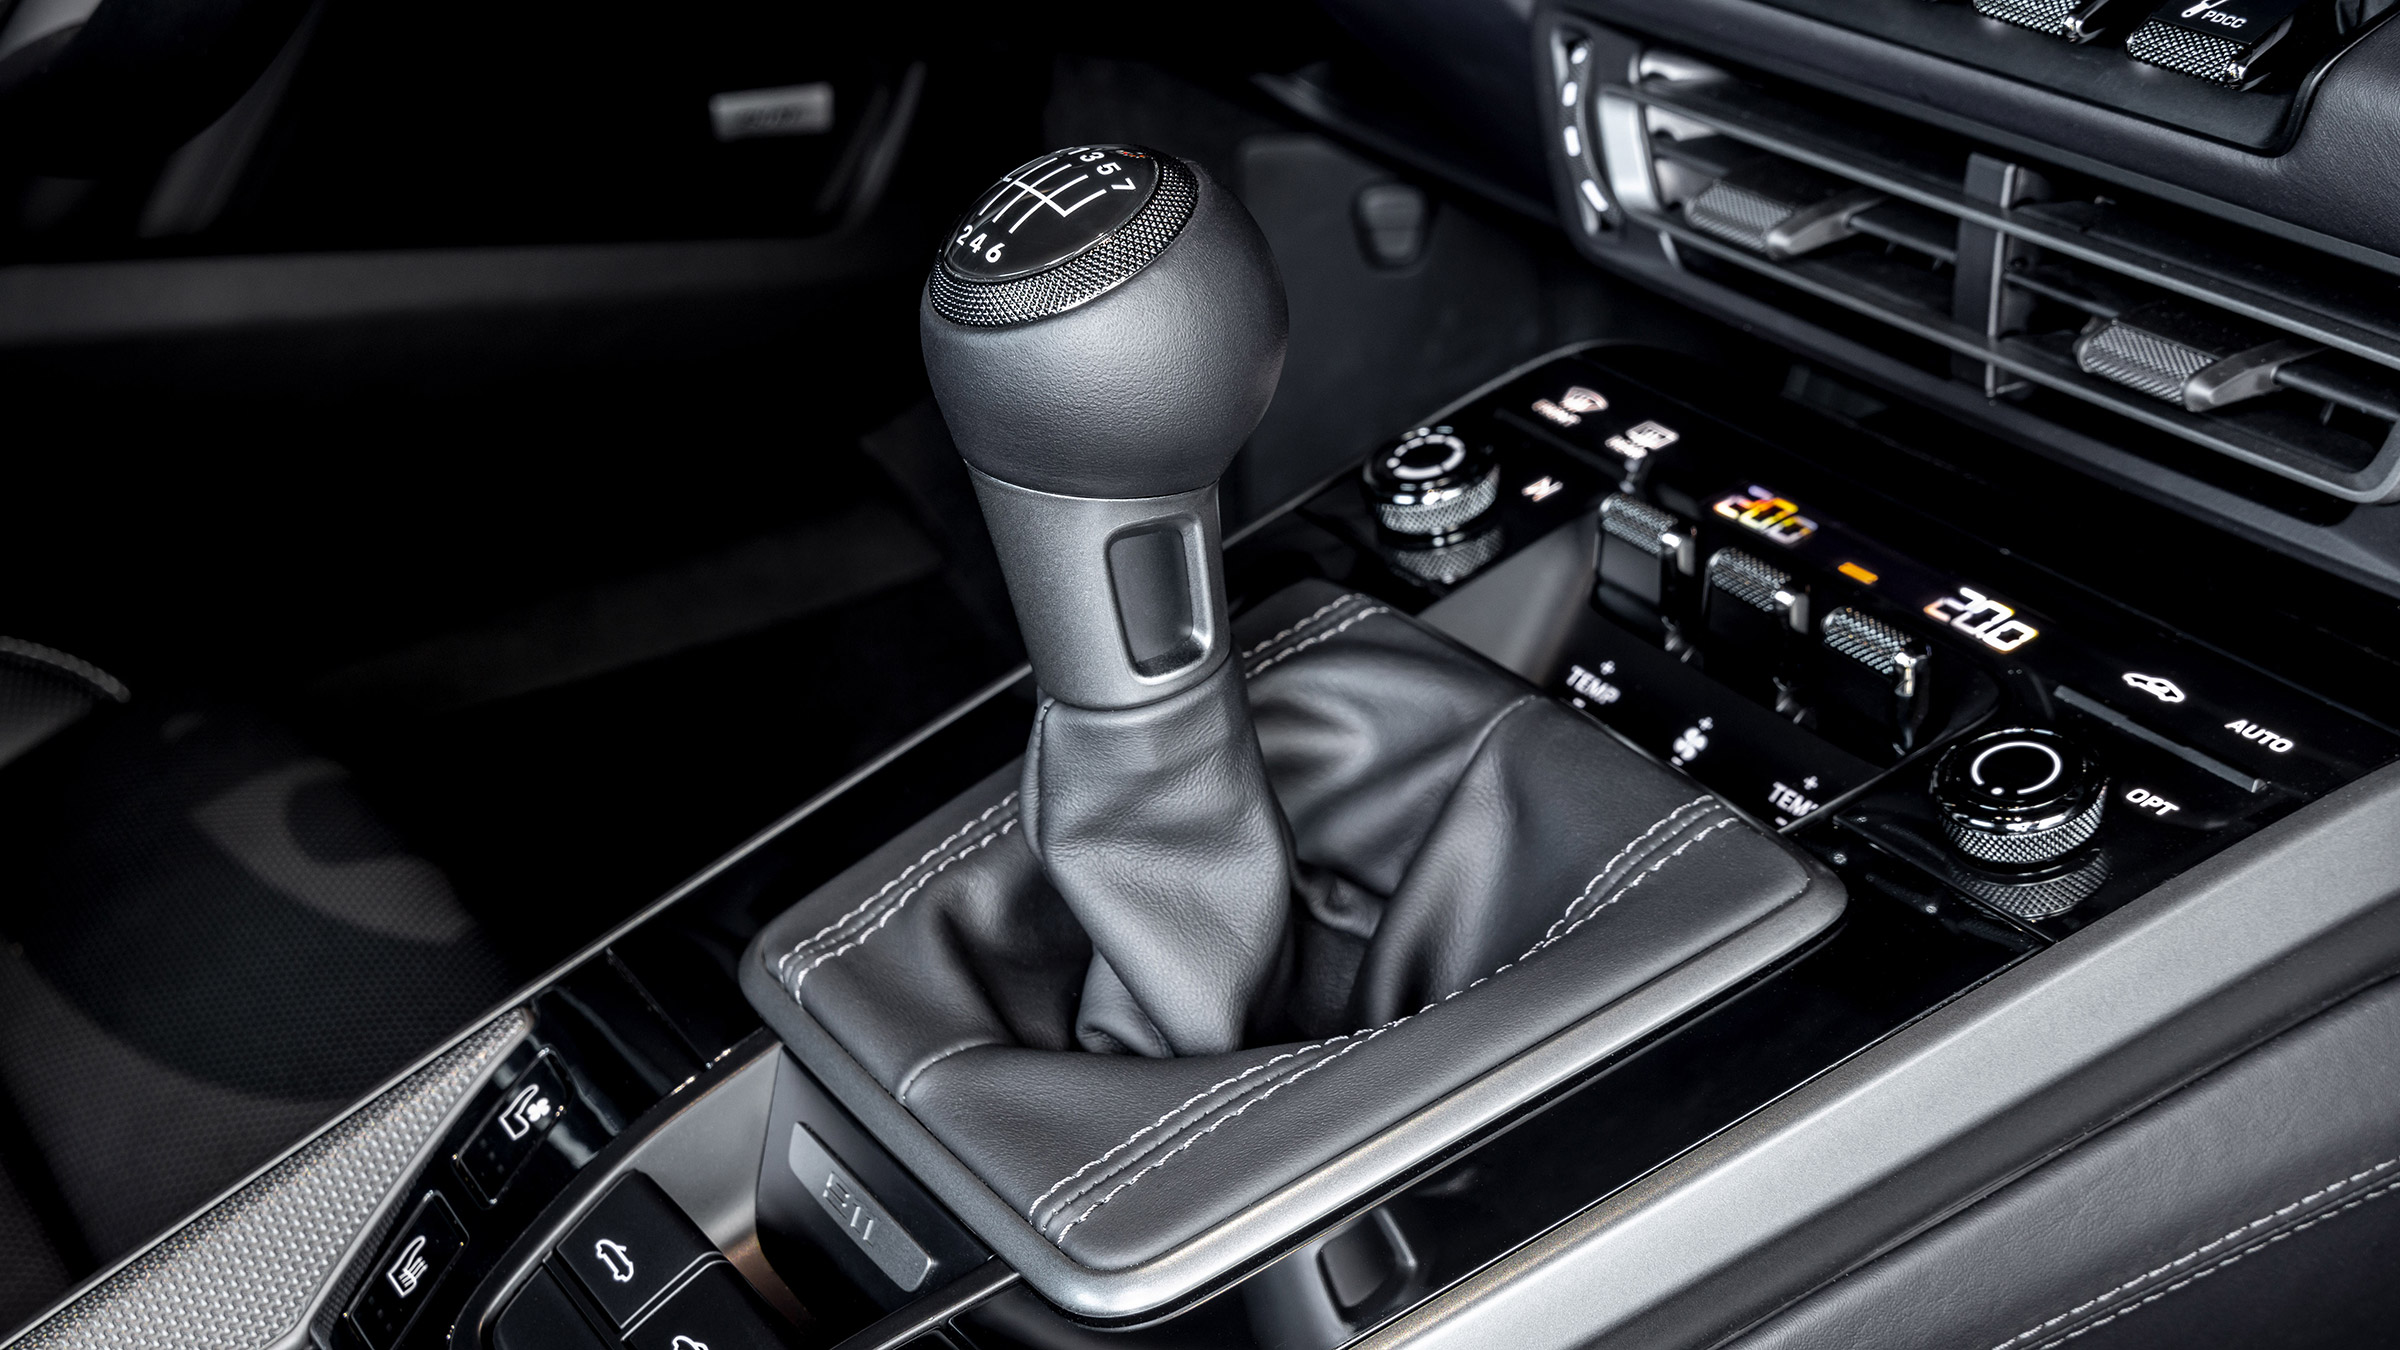 Porsche 911 Carrera S manual now available to order in the UK | evo